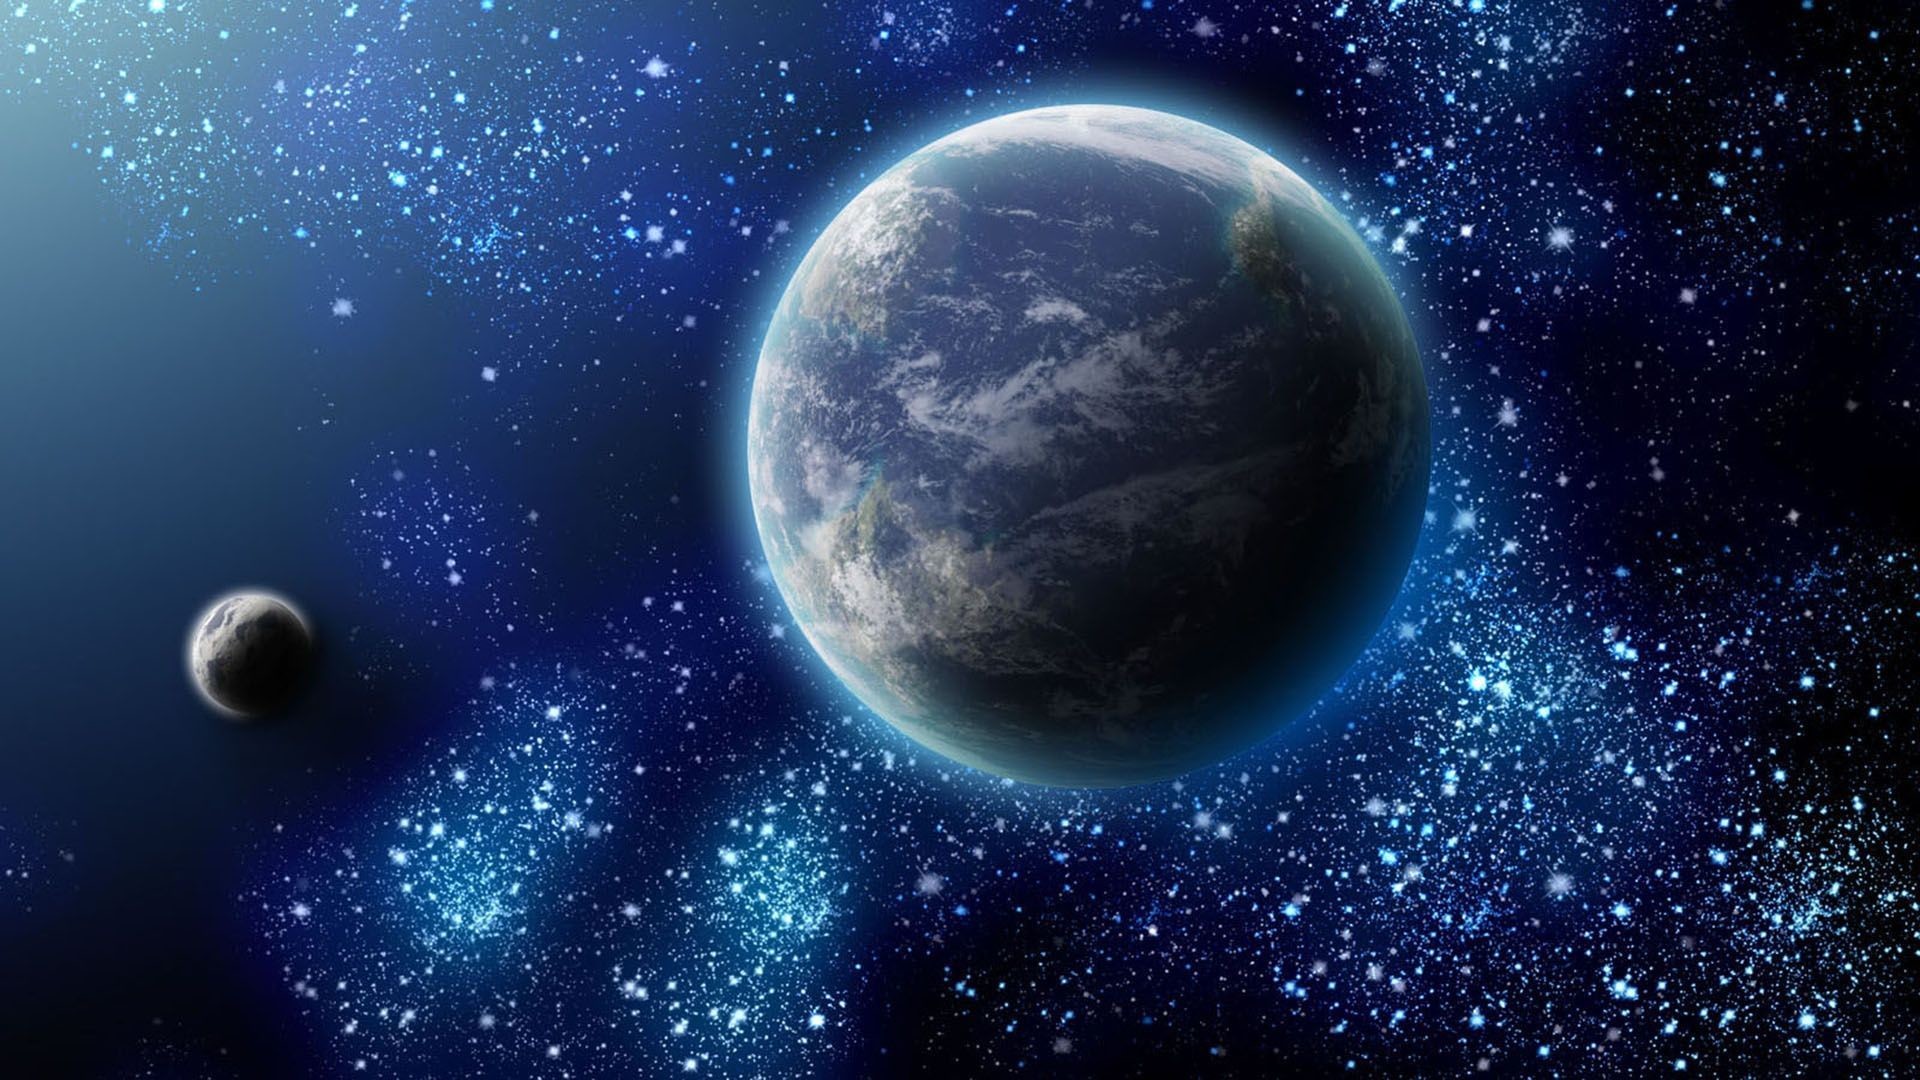 Cool space planets backgrounds for desktop 1920×1080